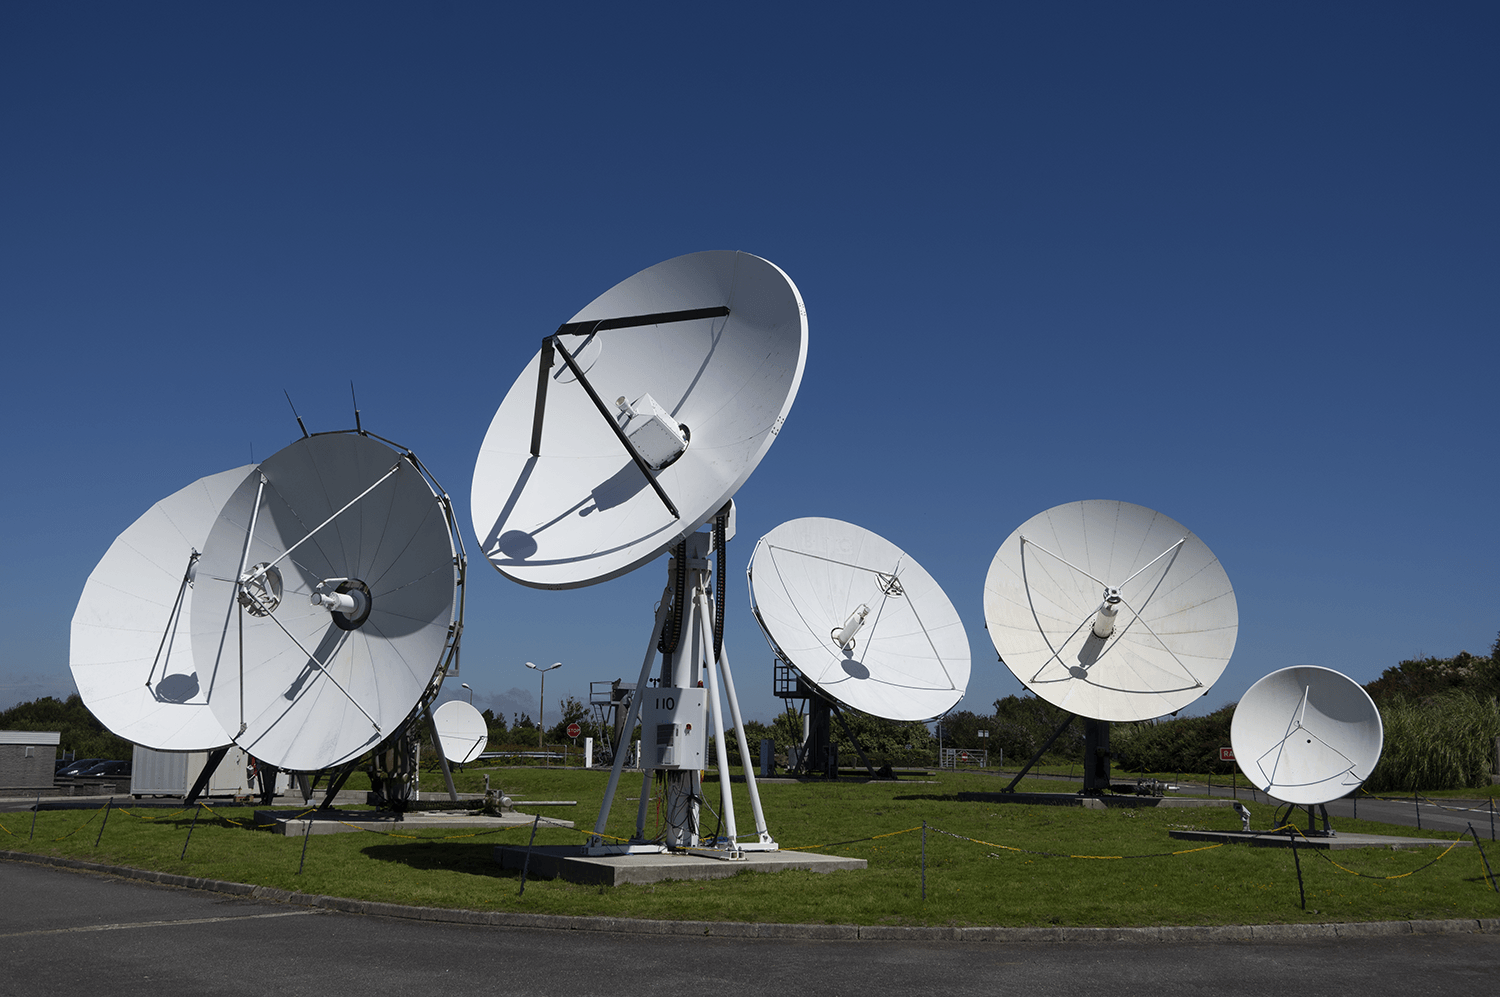 View across Antenna Farm of dishes